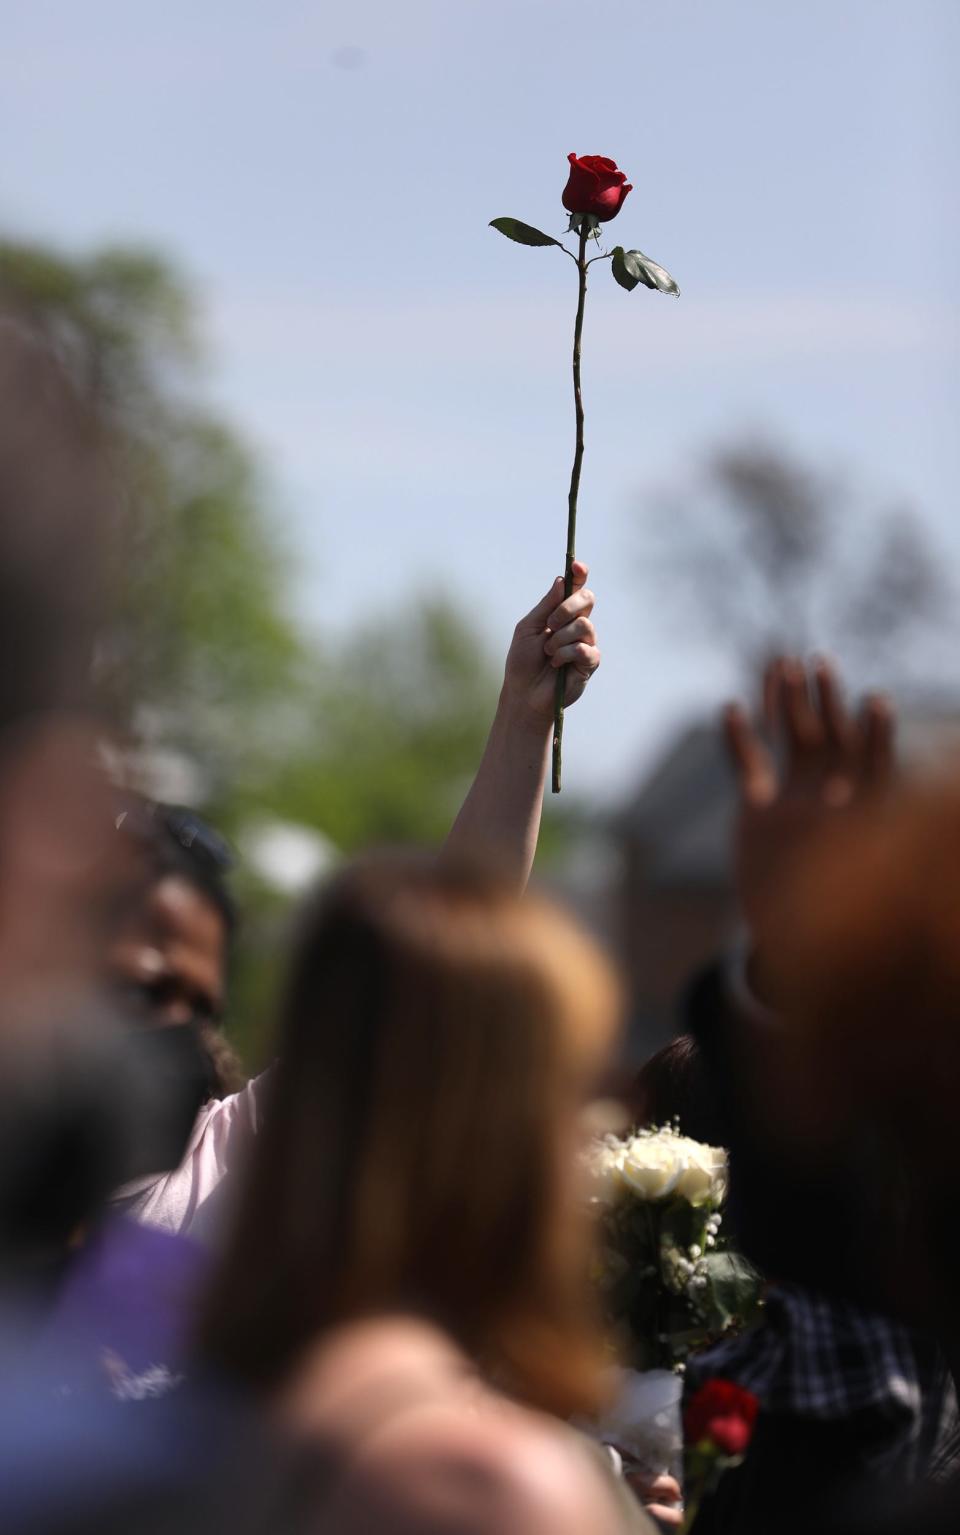 Family and community members marched around the neighborhood, held up roses as they marched.  The group prayed in the street in front of the Tops Friendly Market on Jefferson Ave., in Buffalo, NY on May 15, 2022. 10 people were killed and three others injured in a shooting at the Buffalo grocery store on May 14, 2022.  